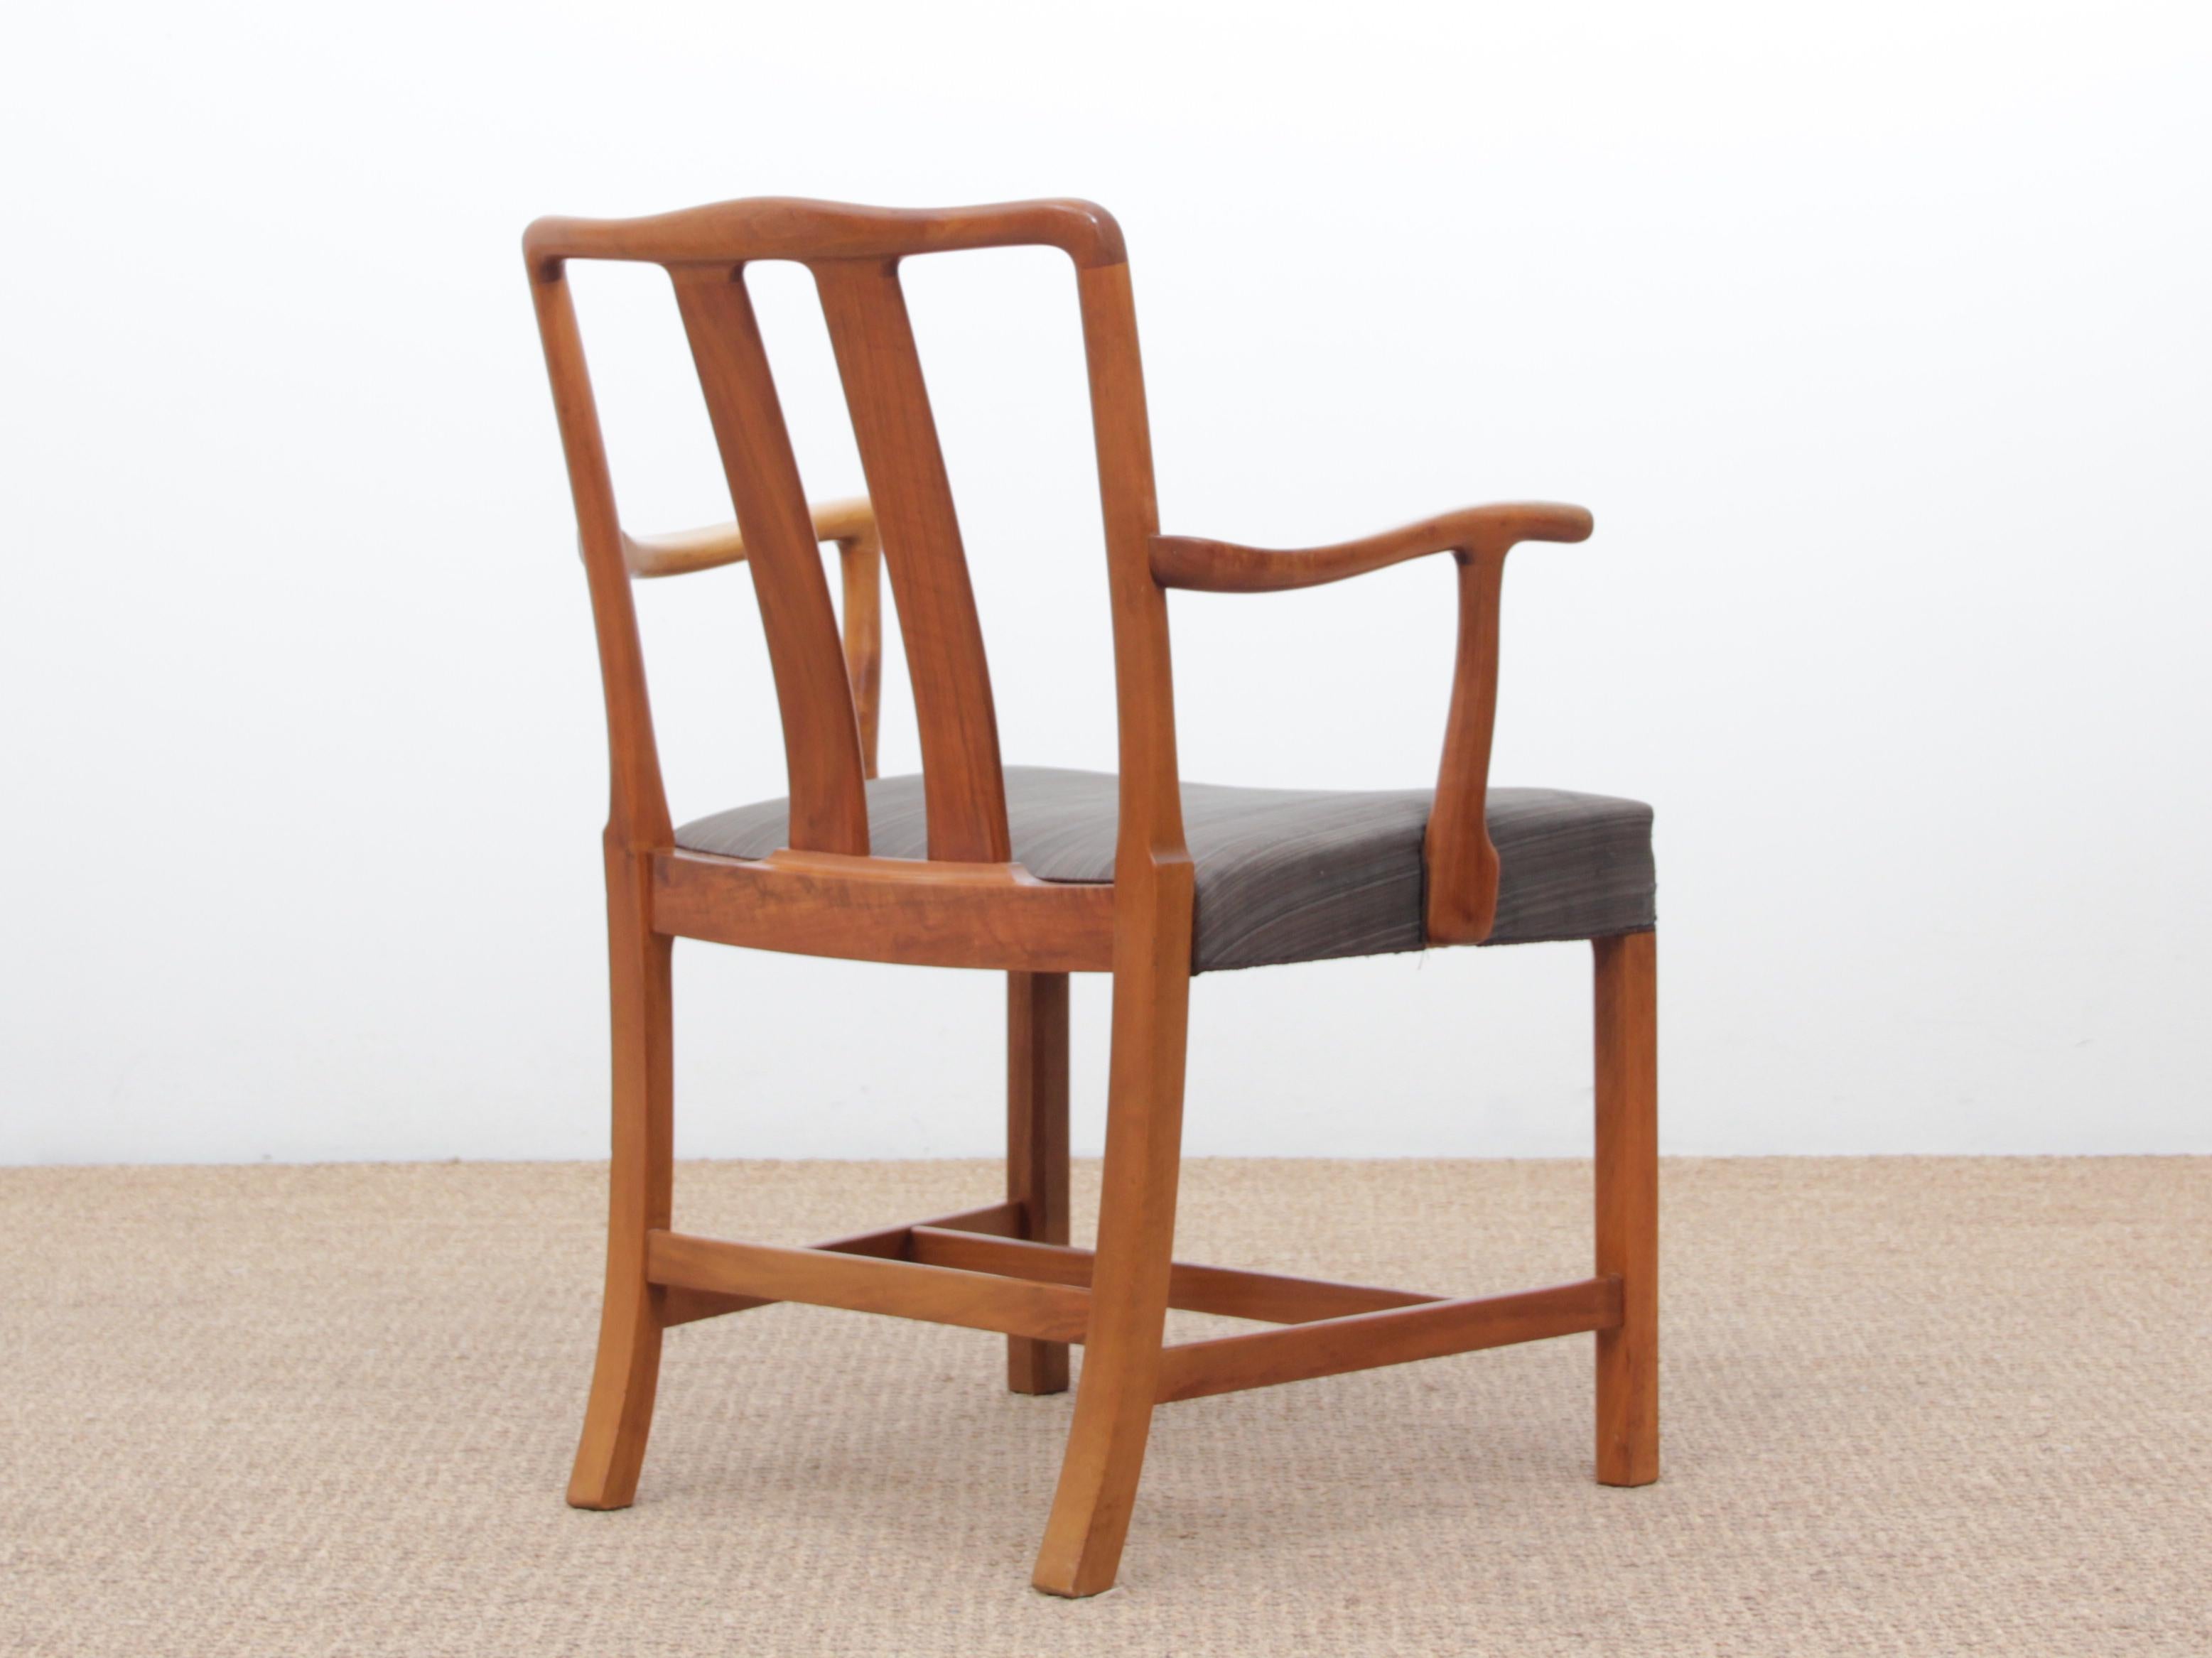 Mid-Century Modern Scandinavian Pair of Armchairs by Ole Wancher For Sale 2